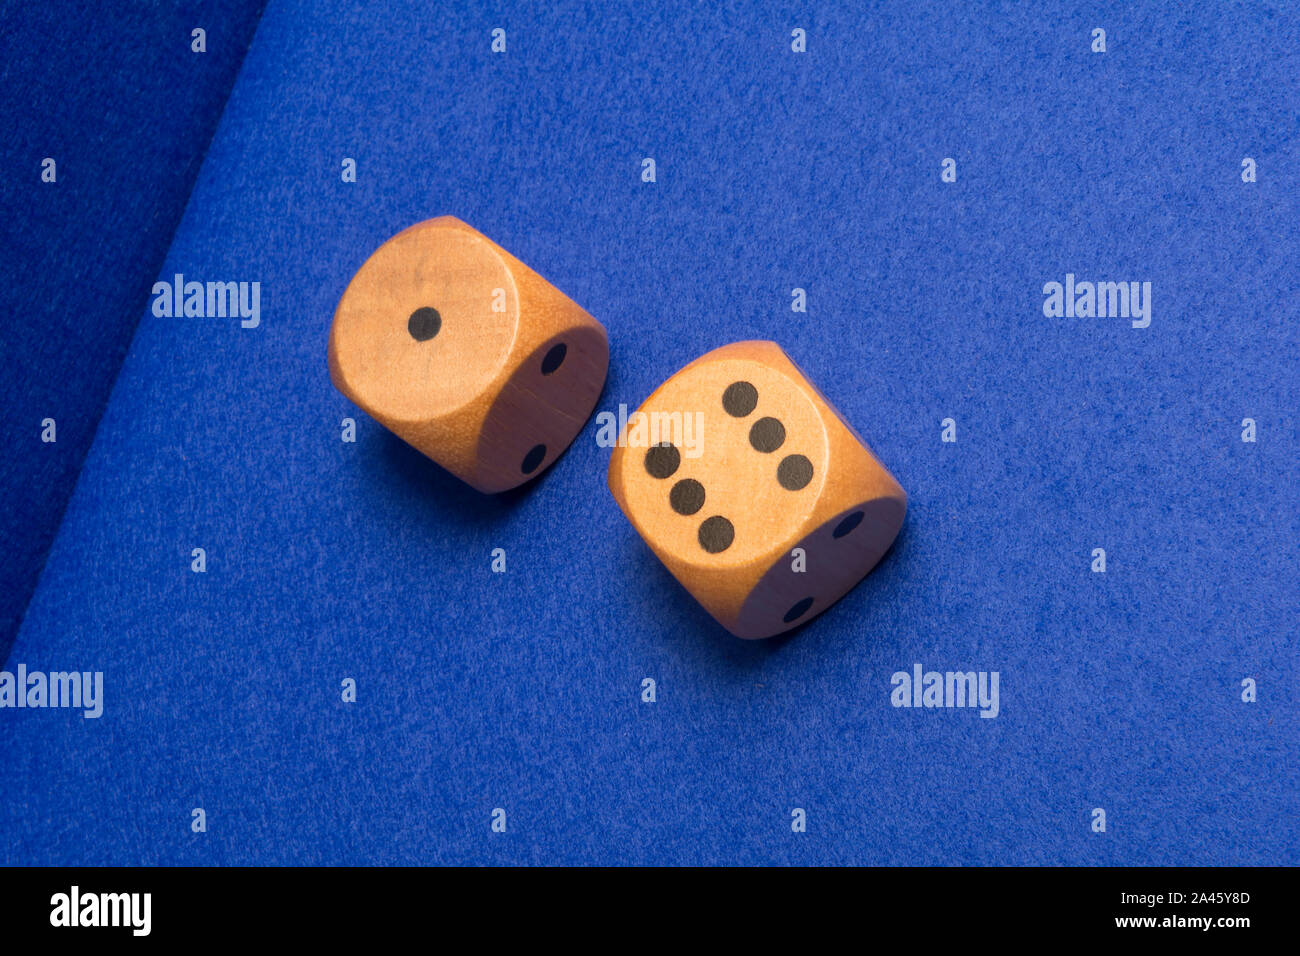 Two gambling dice showing a five and a two Stock Photo